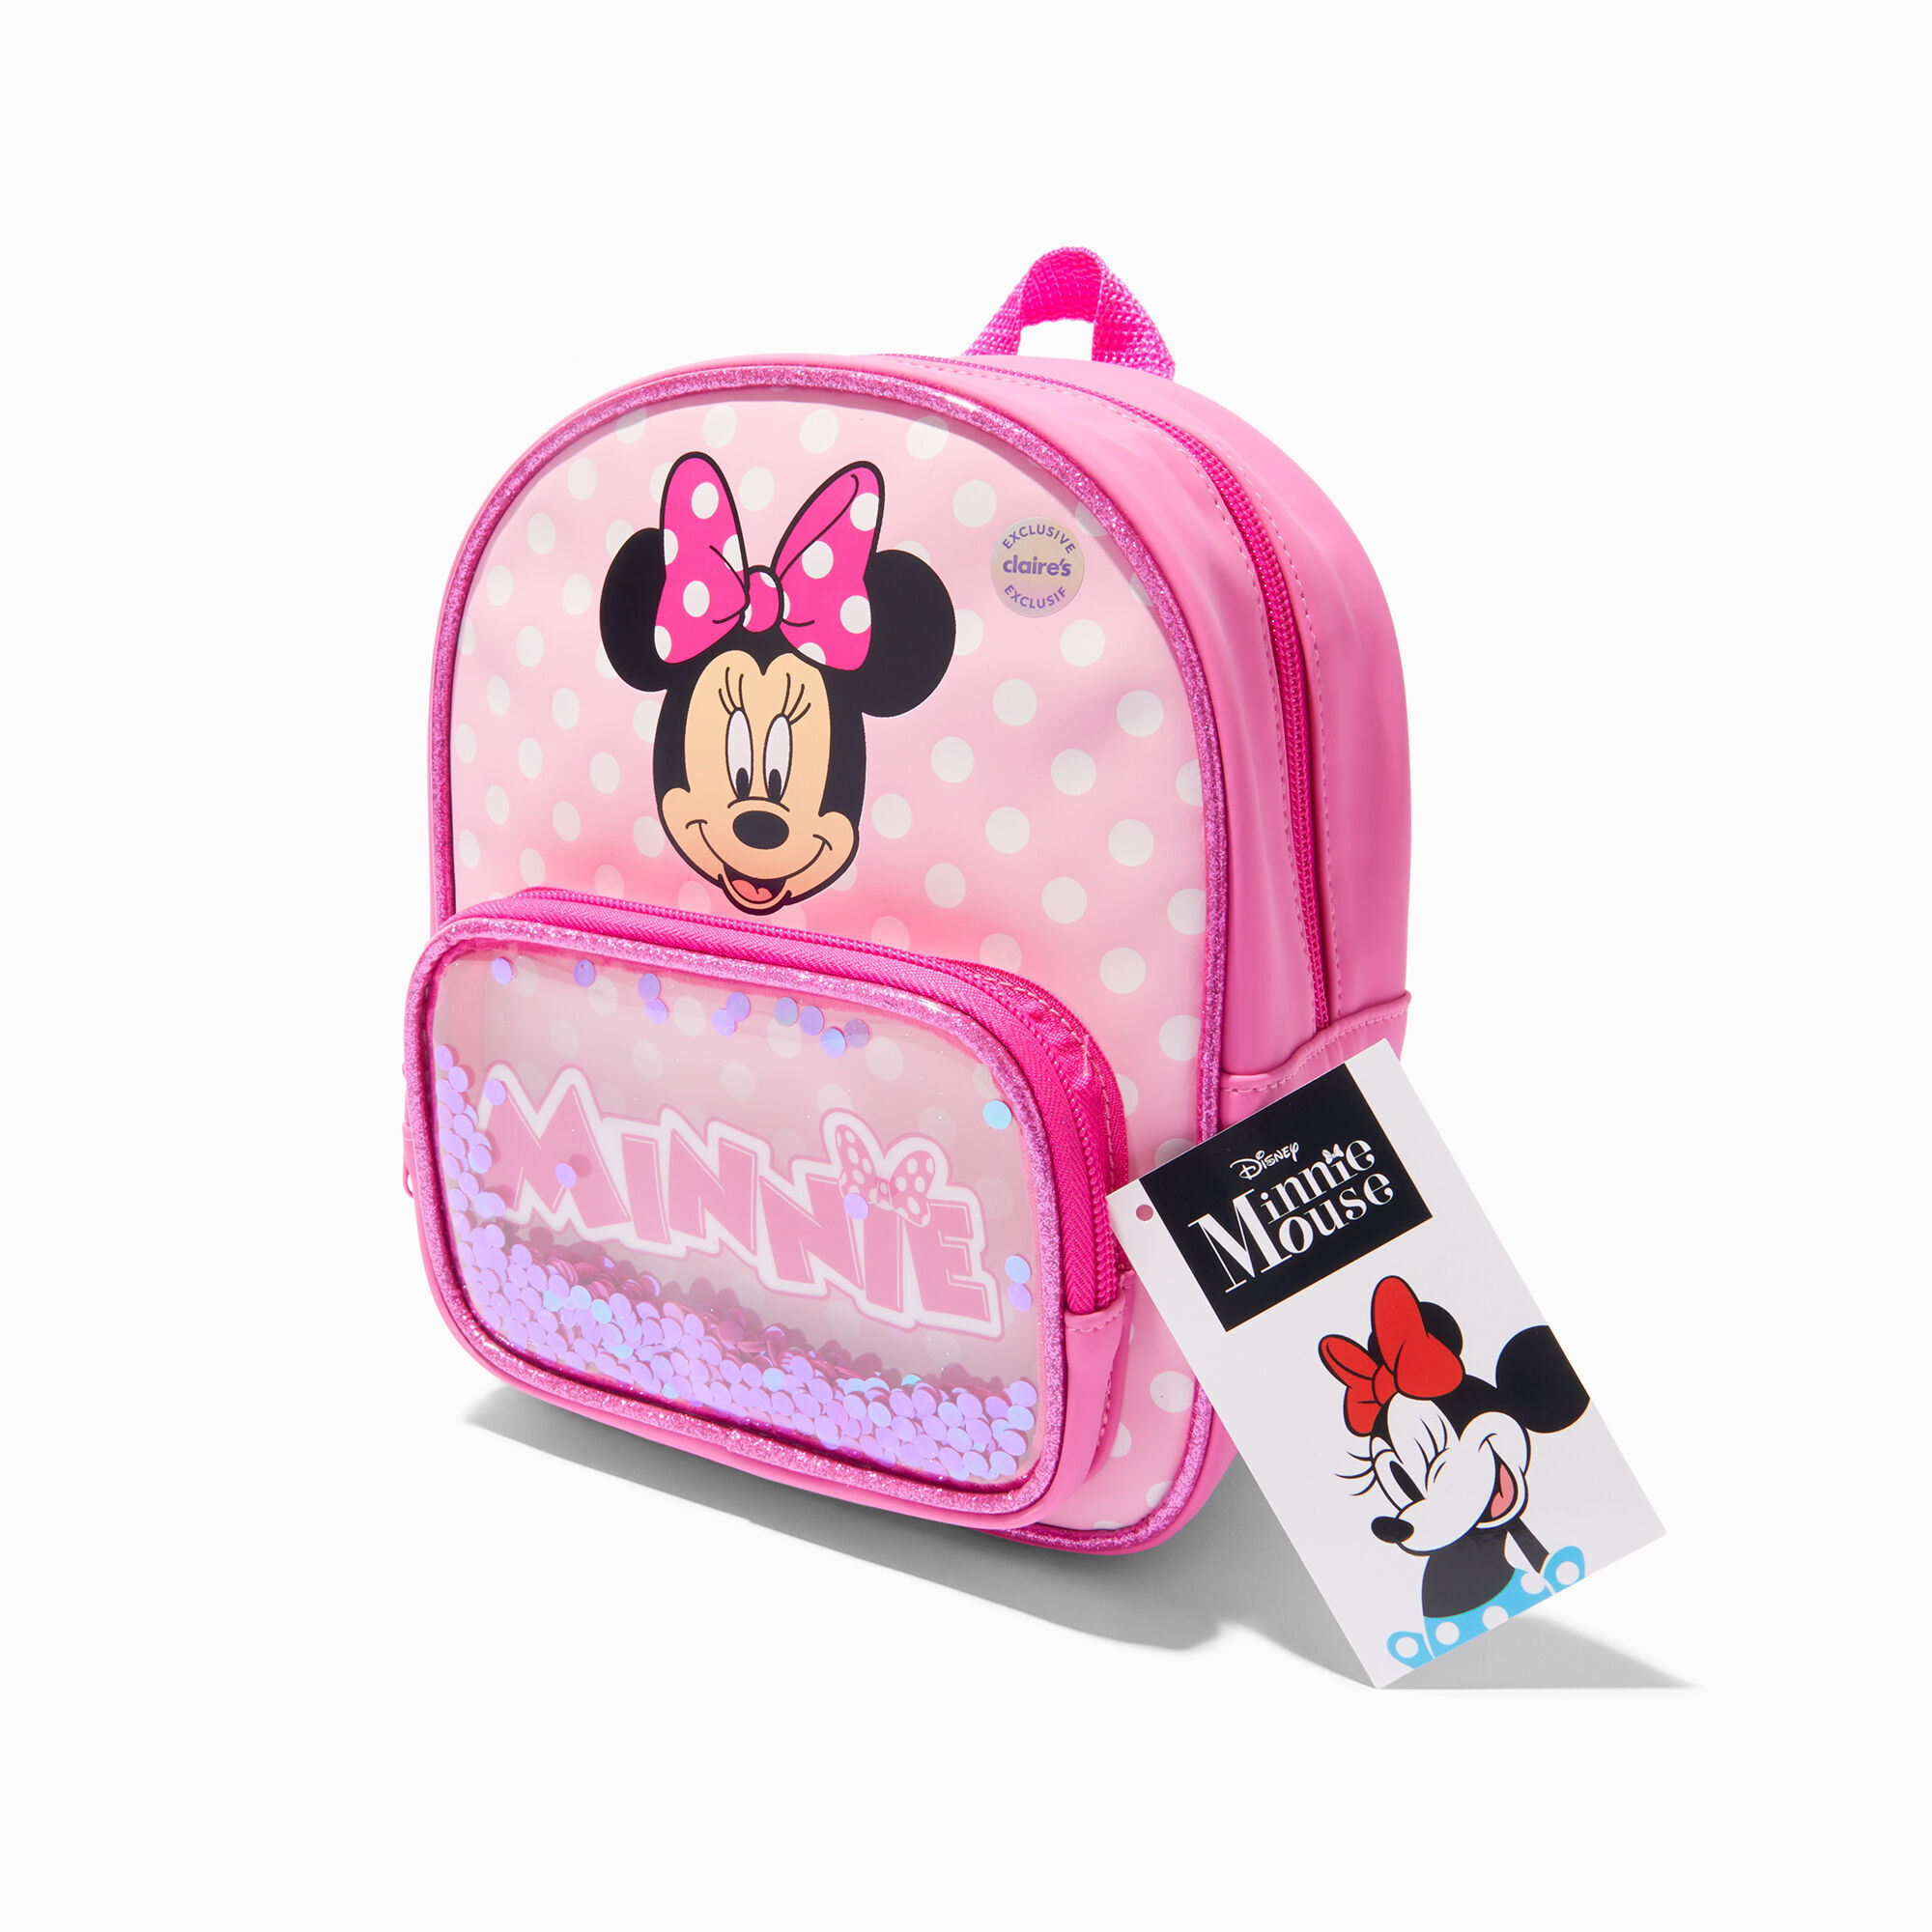 View Disney Minnie Mouse Claires Exclusive Confetti Backpack Pink information